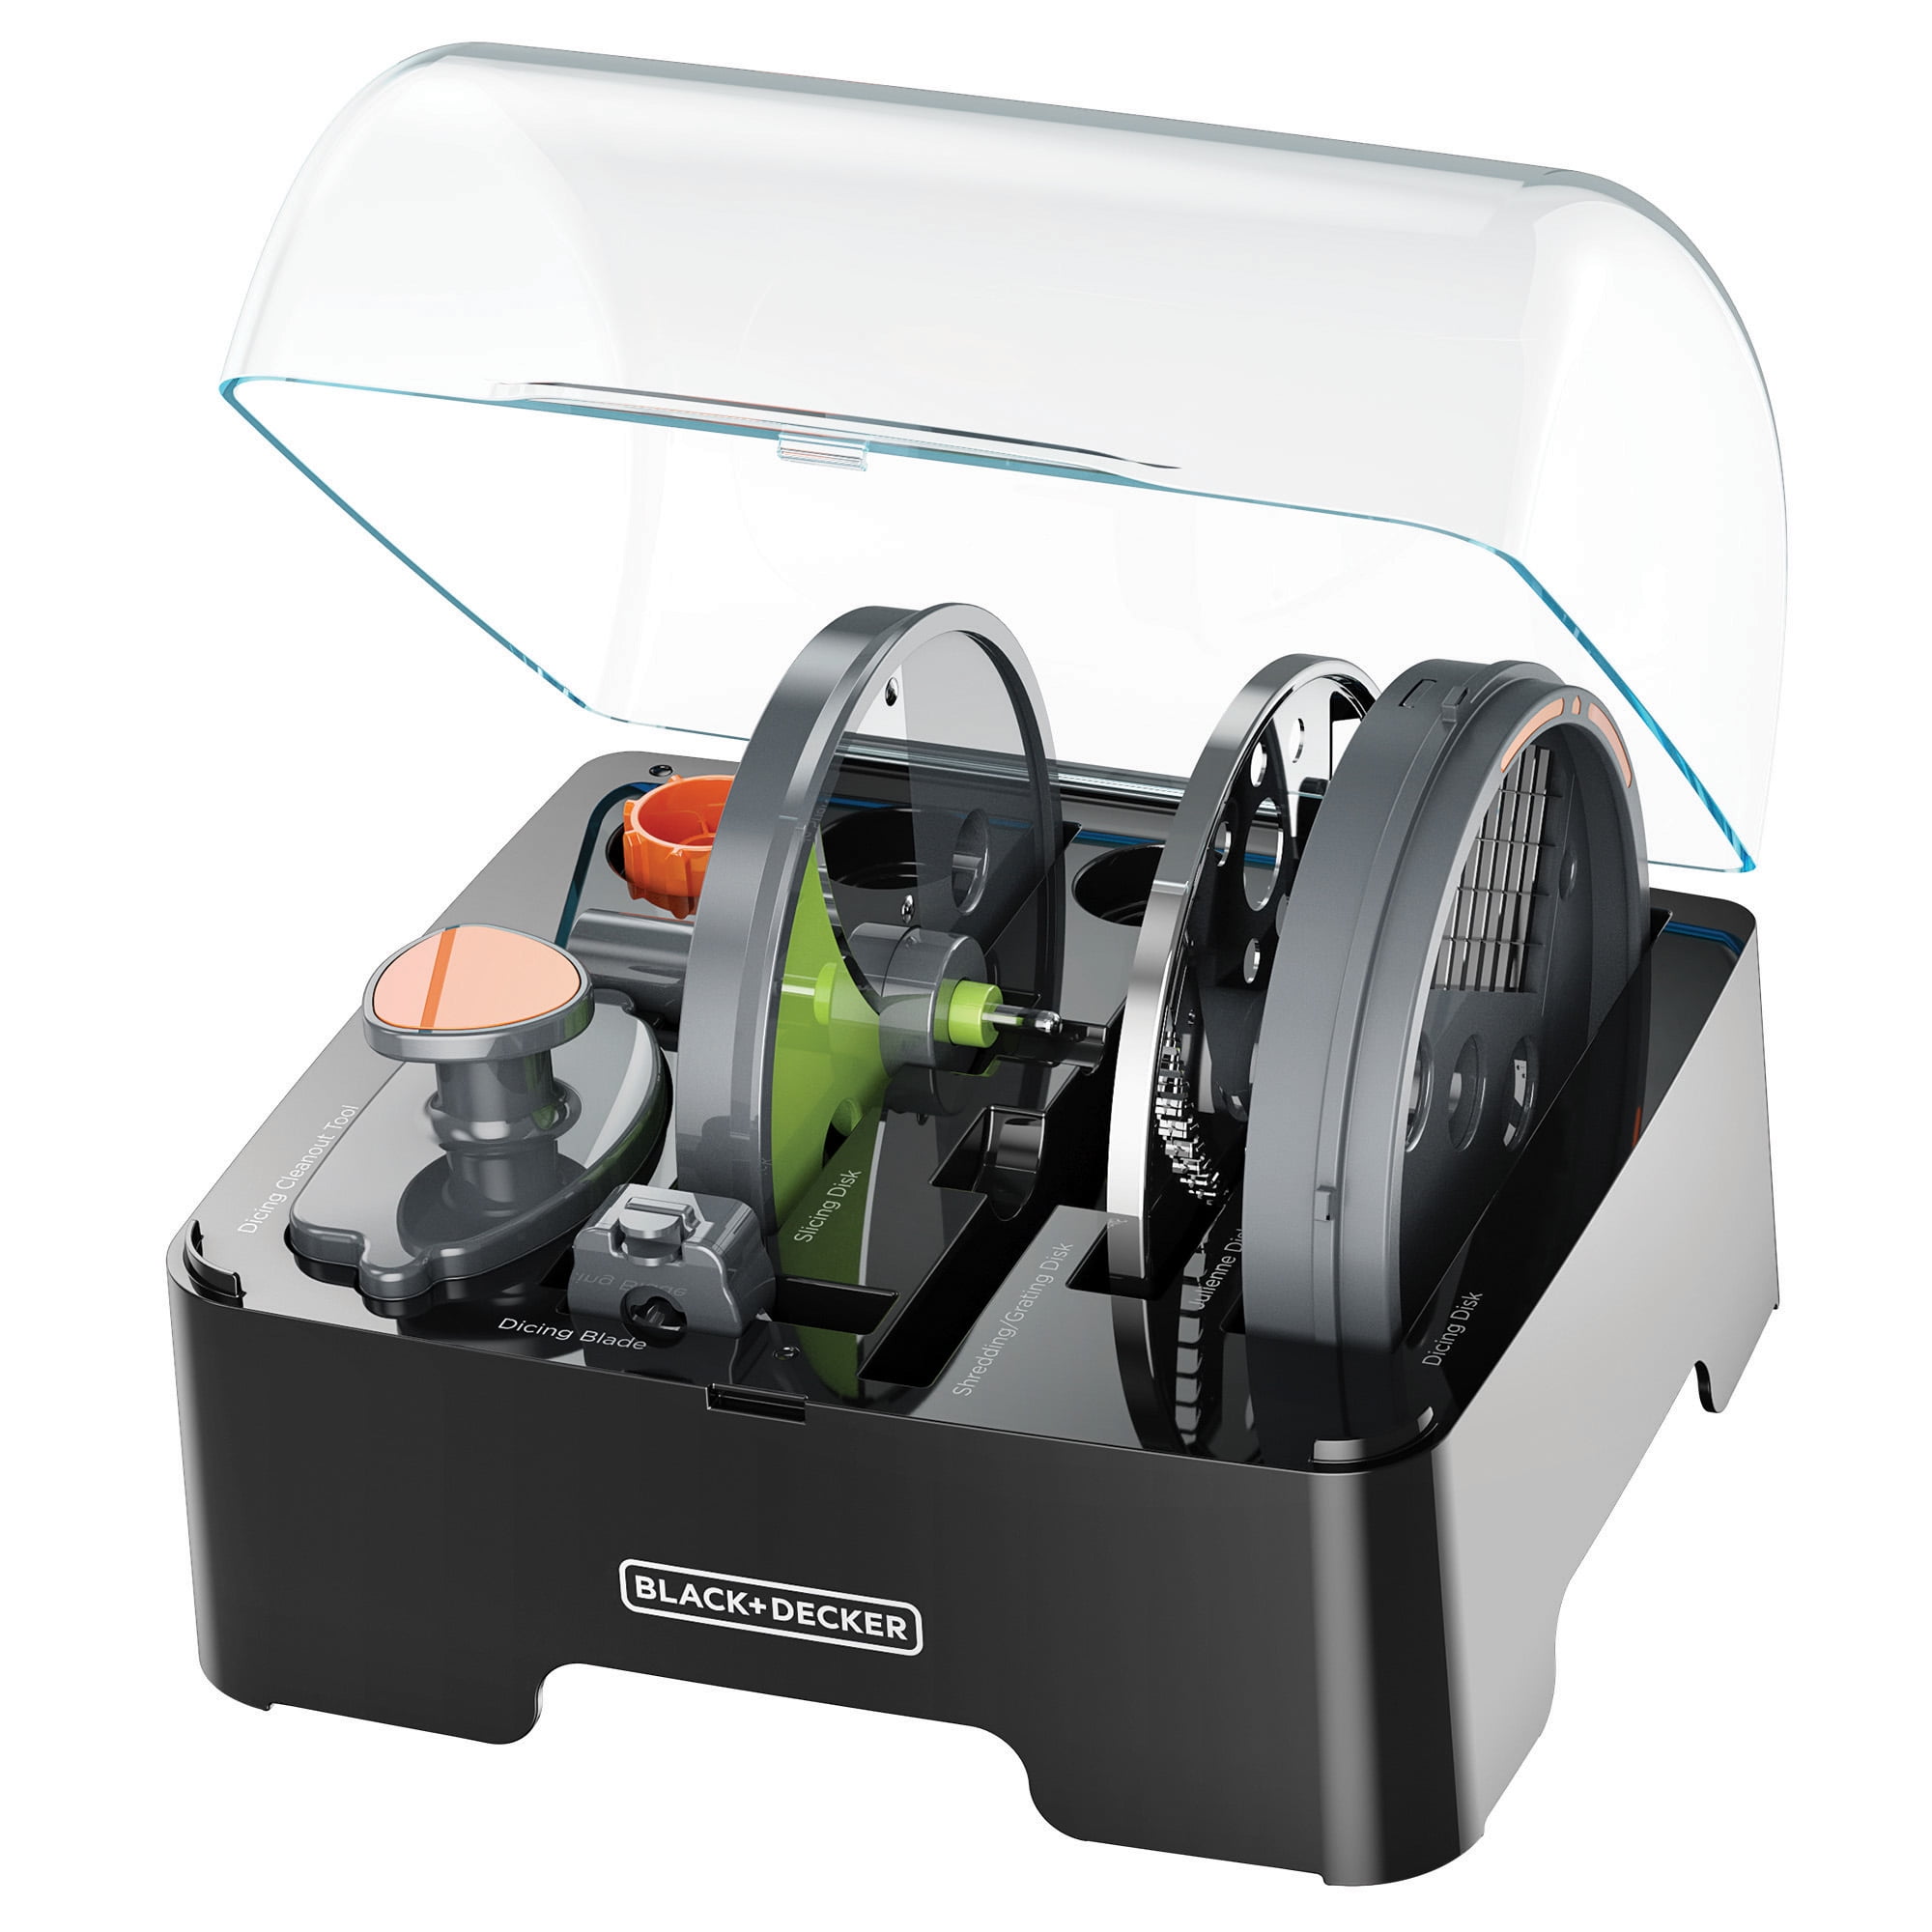 📌 Unpacking and review table saw BLACK+DECKER BES720 